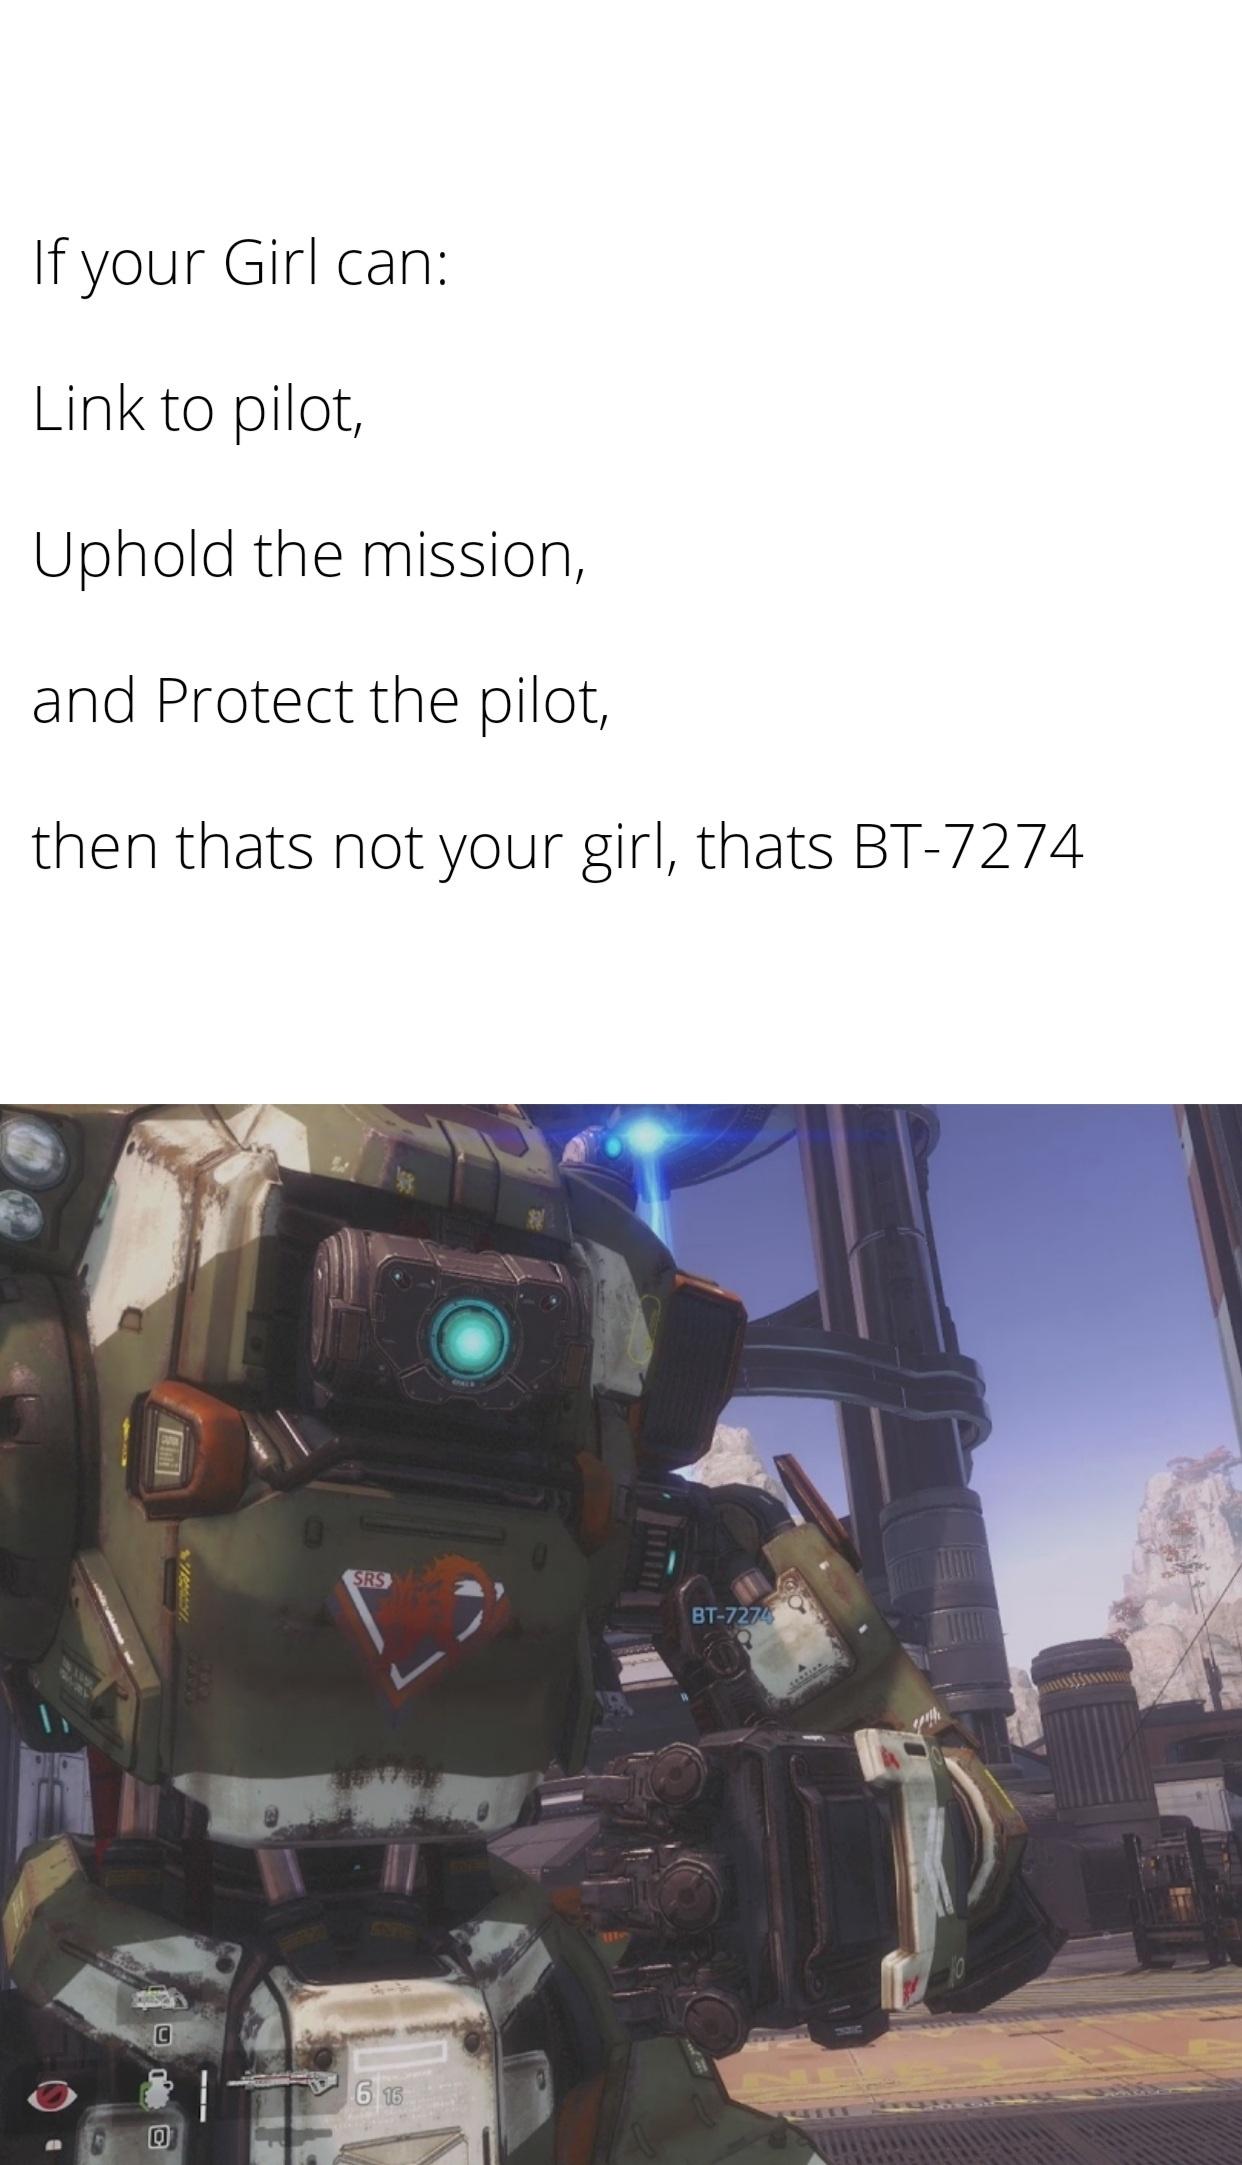 funny gaming memes -titanfall 2 like - If your Girl can Link to pilot, Uphold the mission, and Protect the pilot, then thats not your girl, thats Bt7274 Srs Bt7274 C 6 16